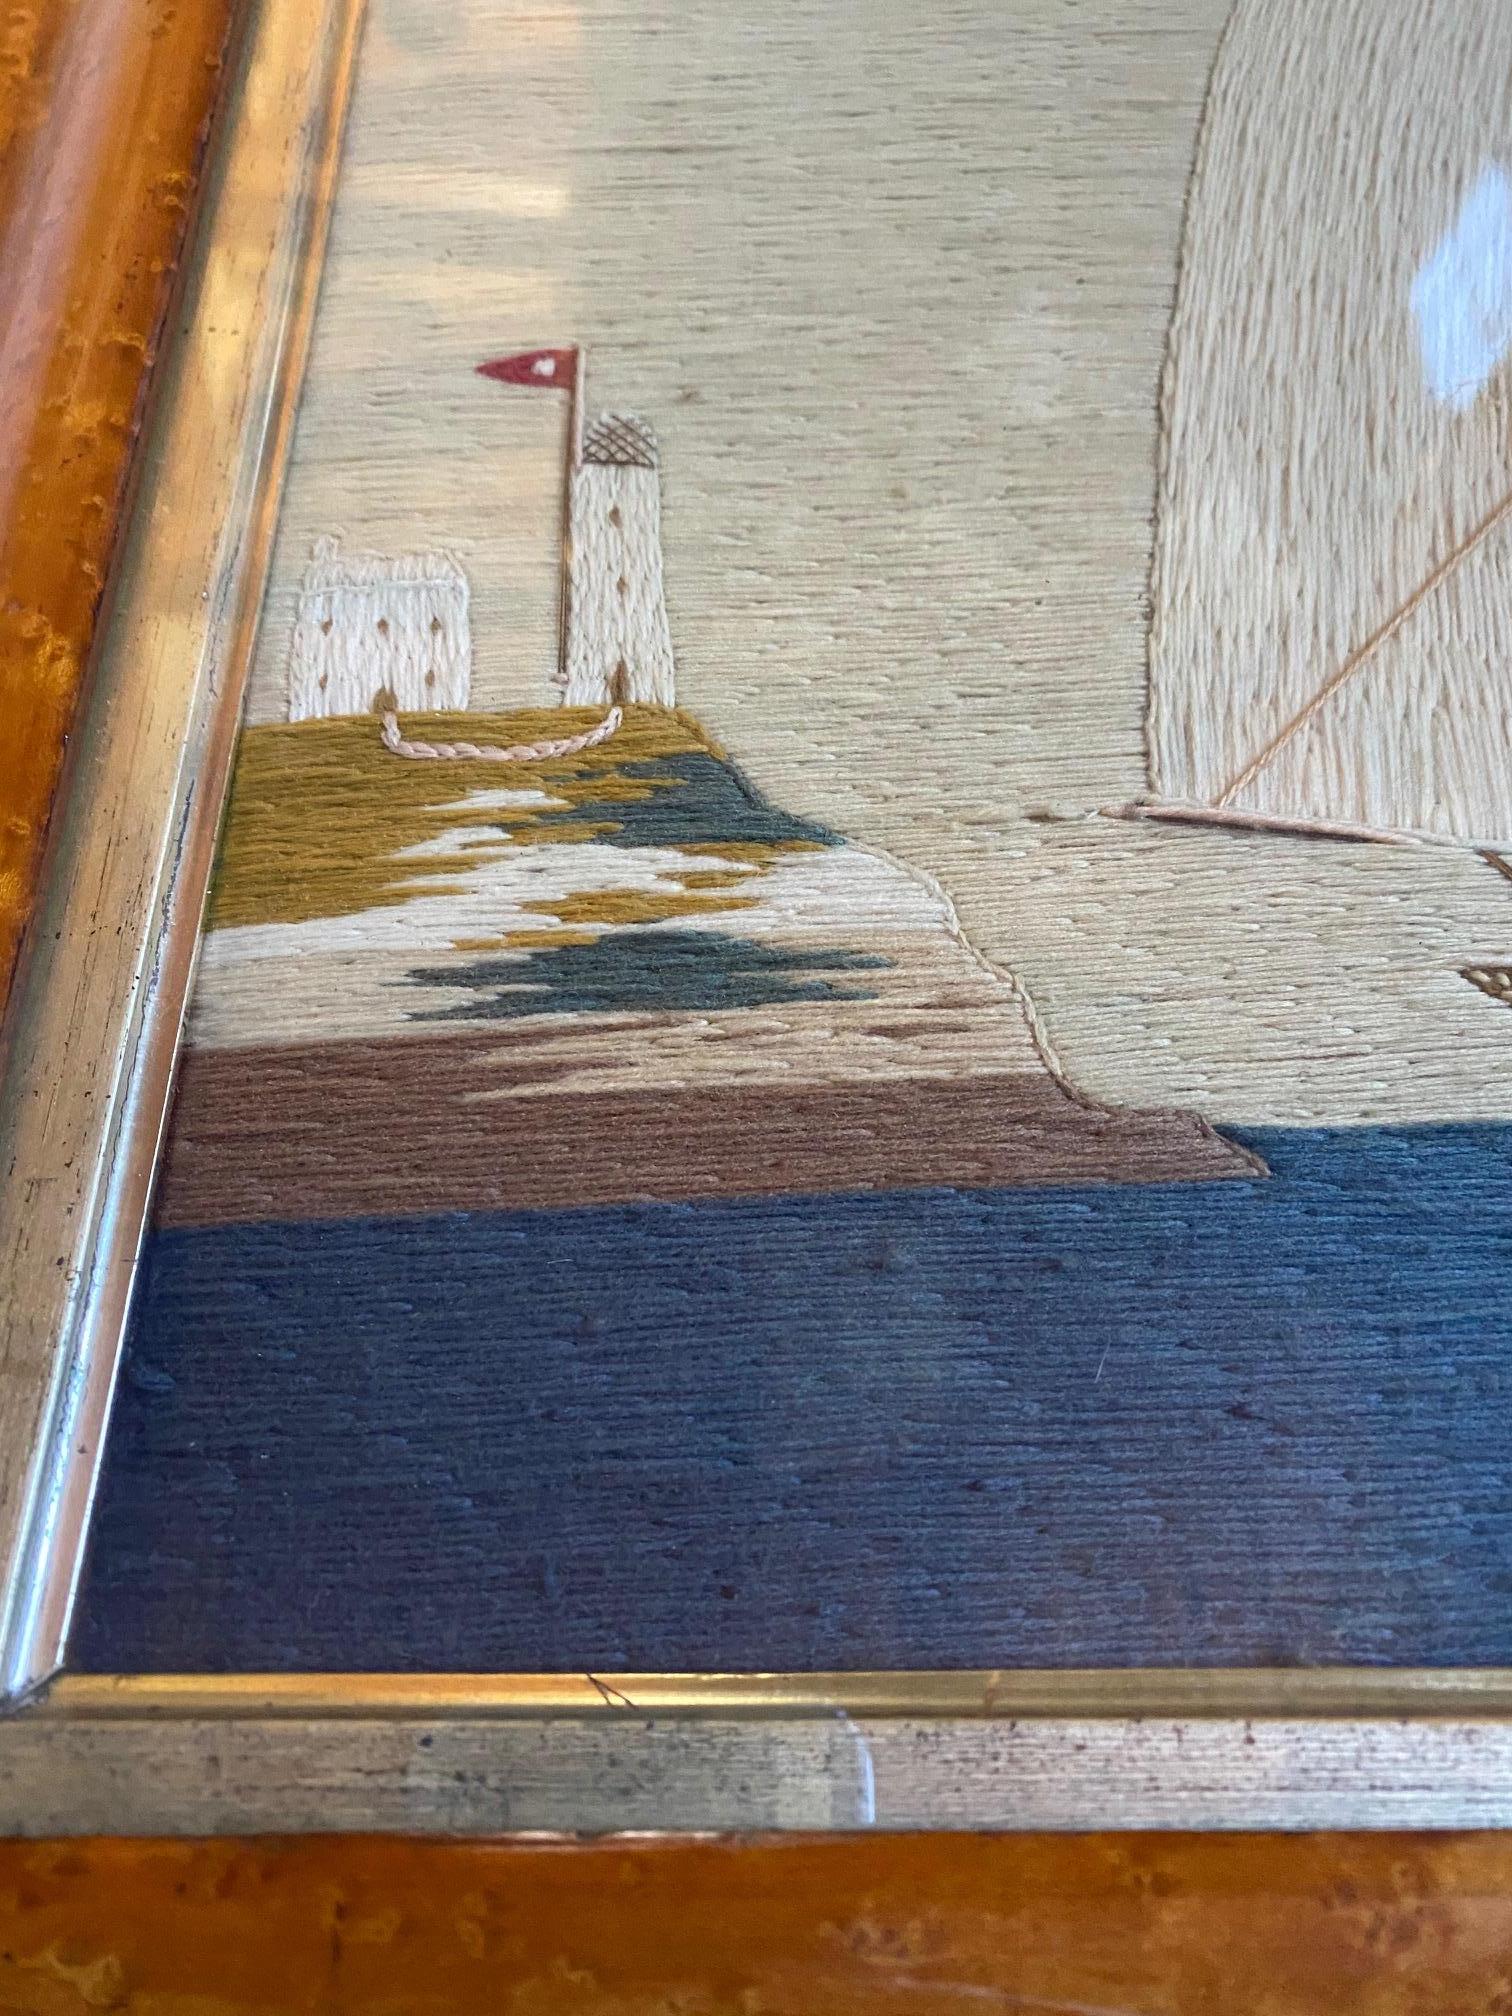 19th century Trinity House Sailor's Woolwork Embroidery, British, circa 1870, a sailor's folk art hand stitched wool yarn embroidered picture of a schooner under full sail, flying a Number Four pennant on the Main Topmast, and the Red Ensign on the